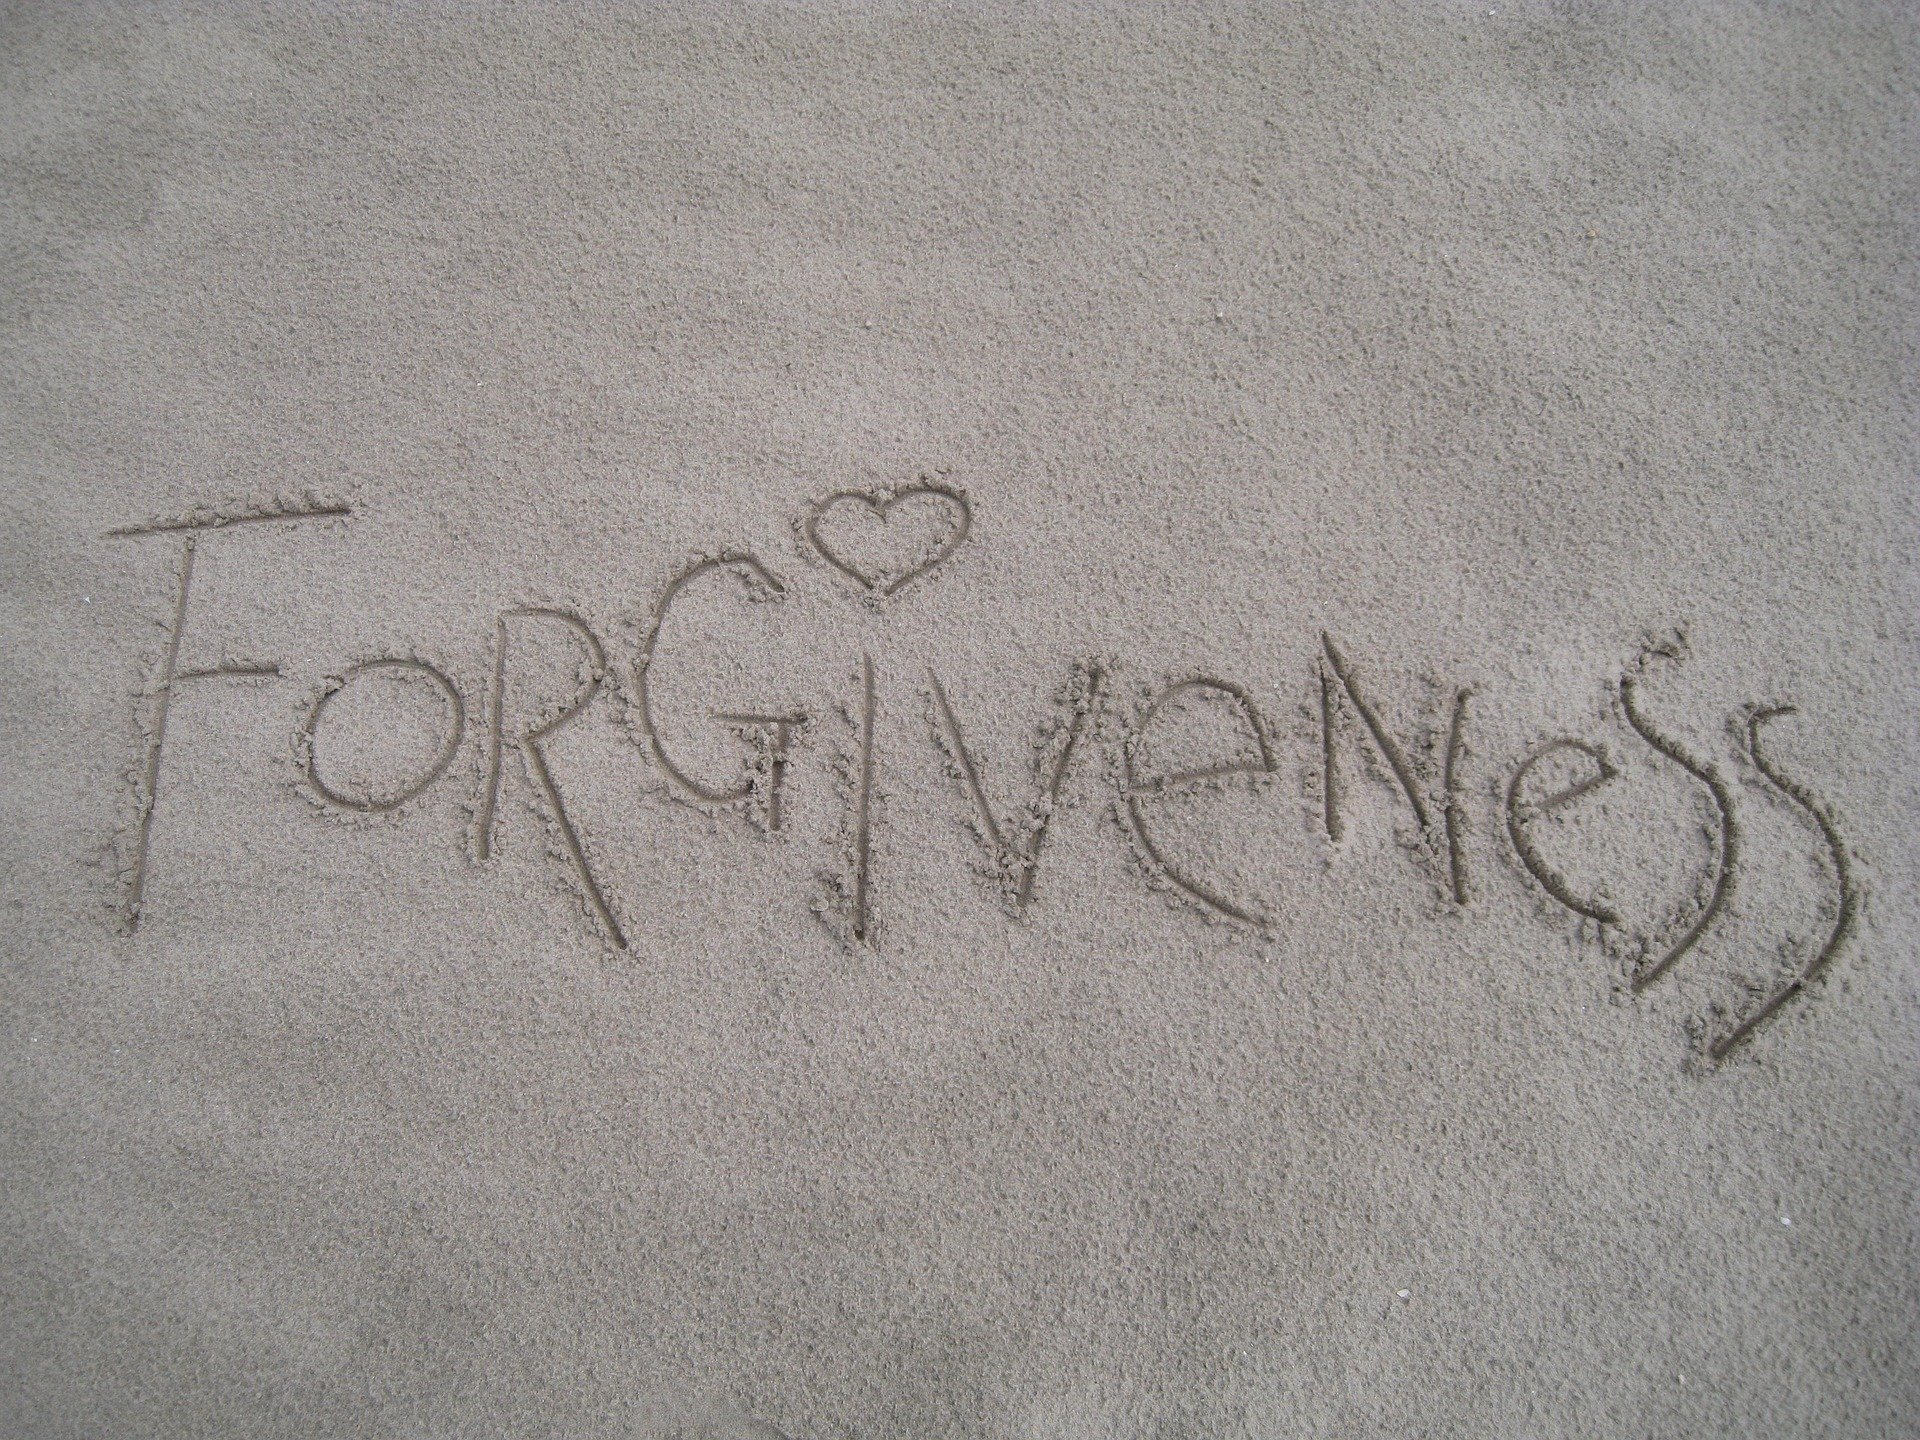 Forgiveness written in sand - title picture for article How to Practice Forgiveness